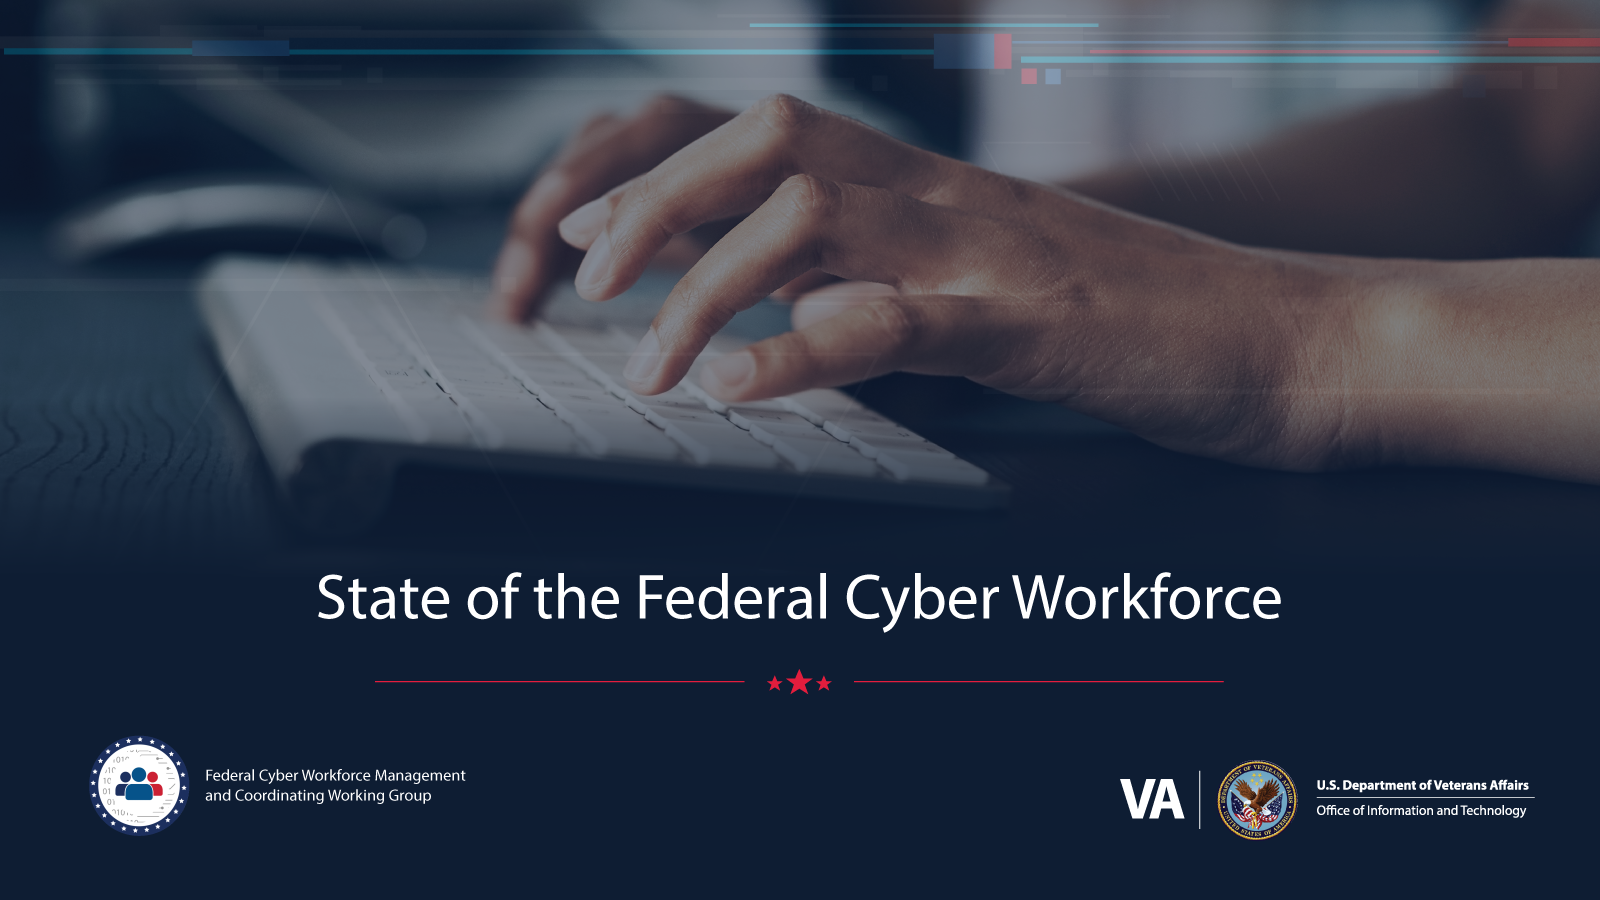 State of the Federal Cyber Workforce